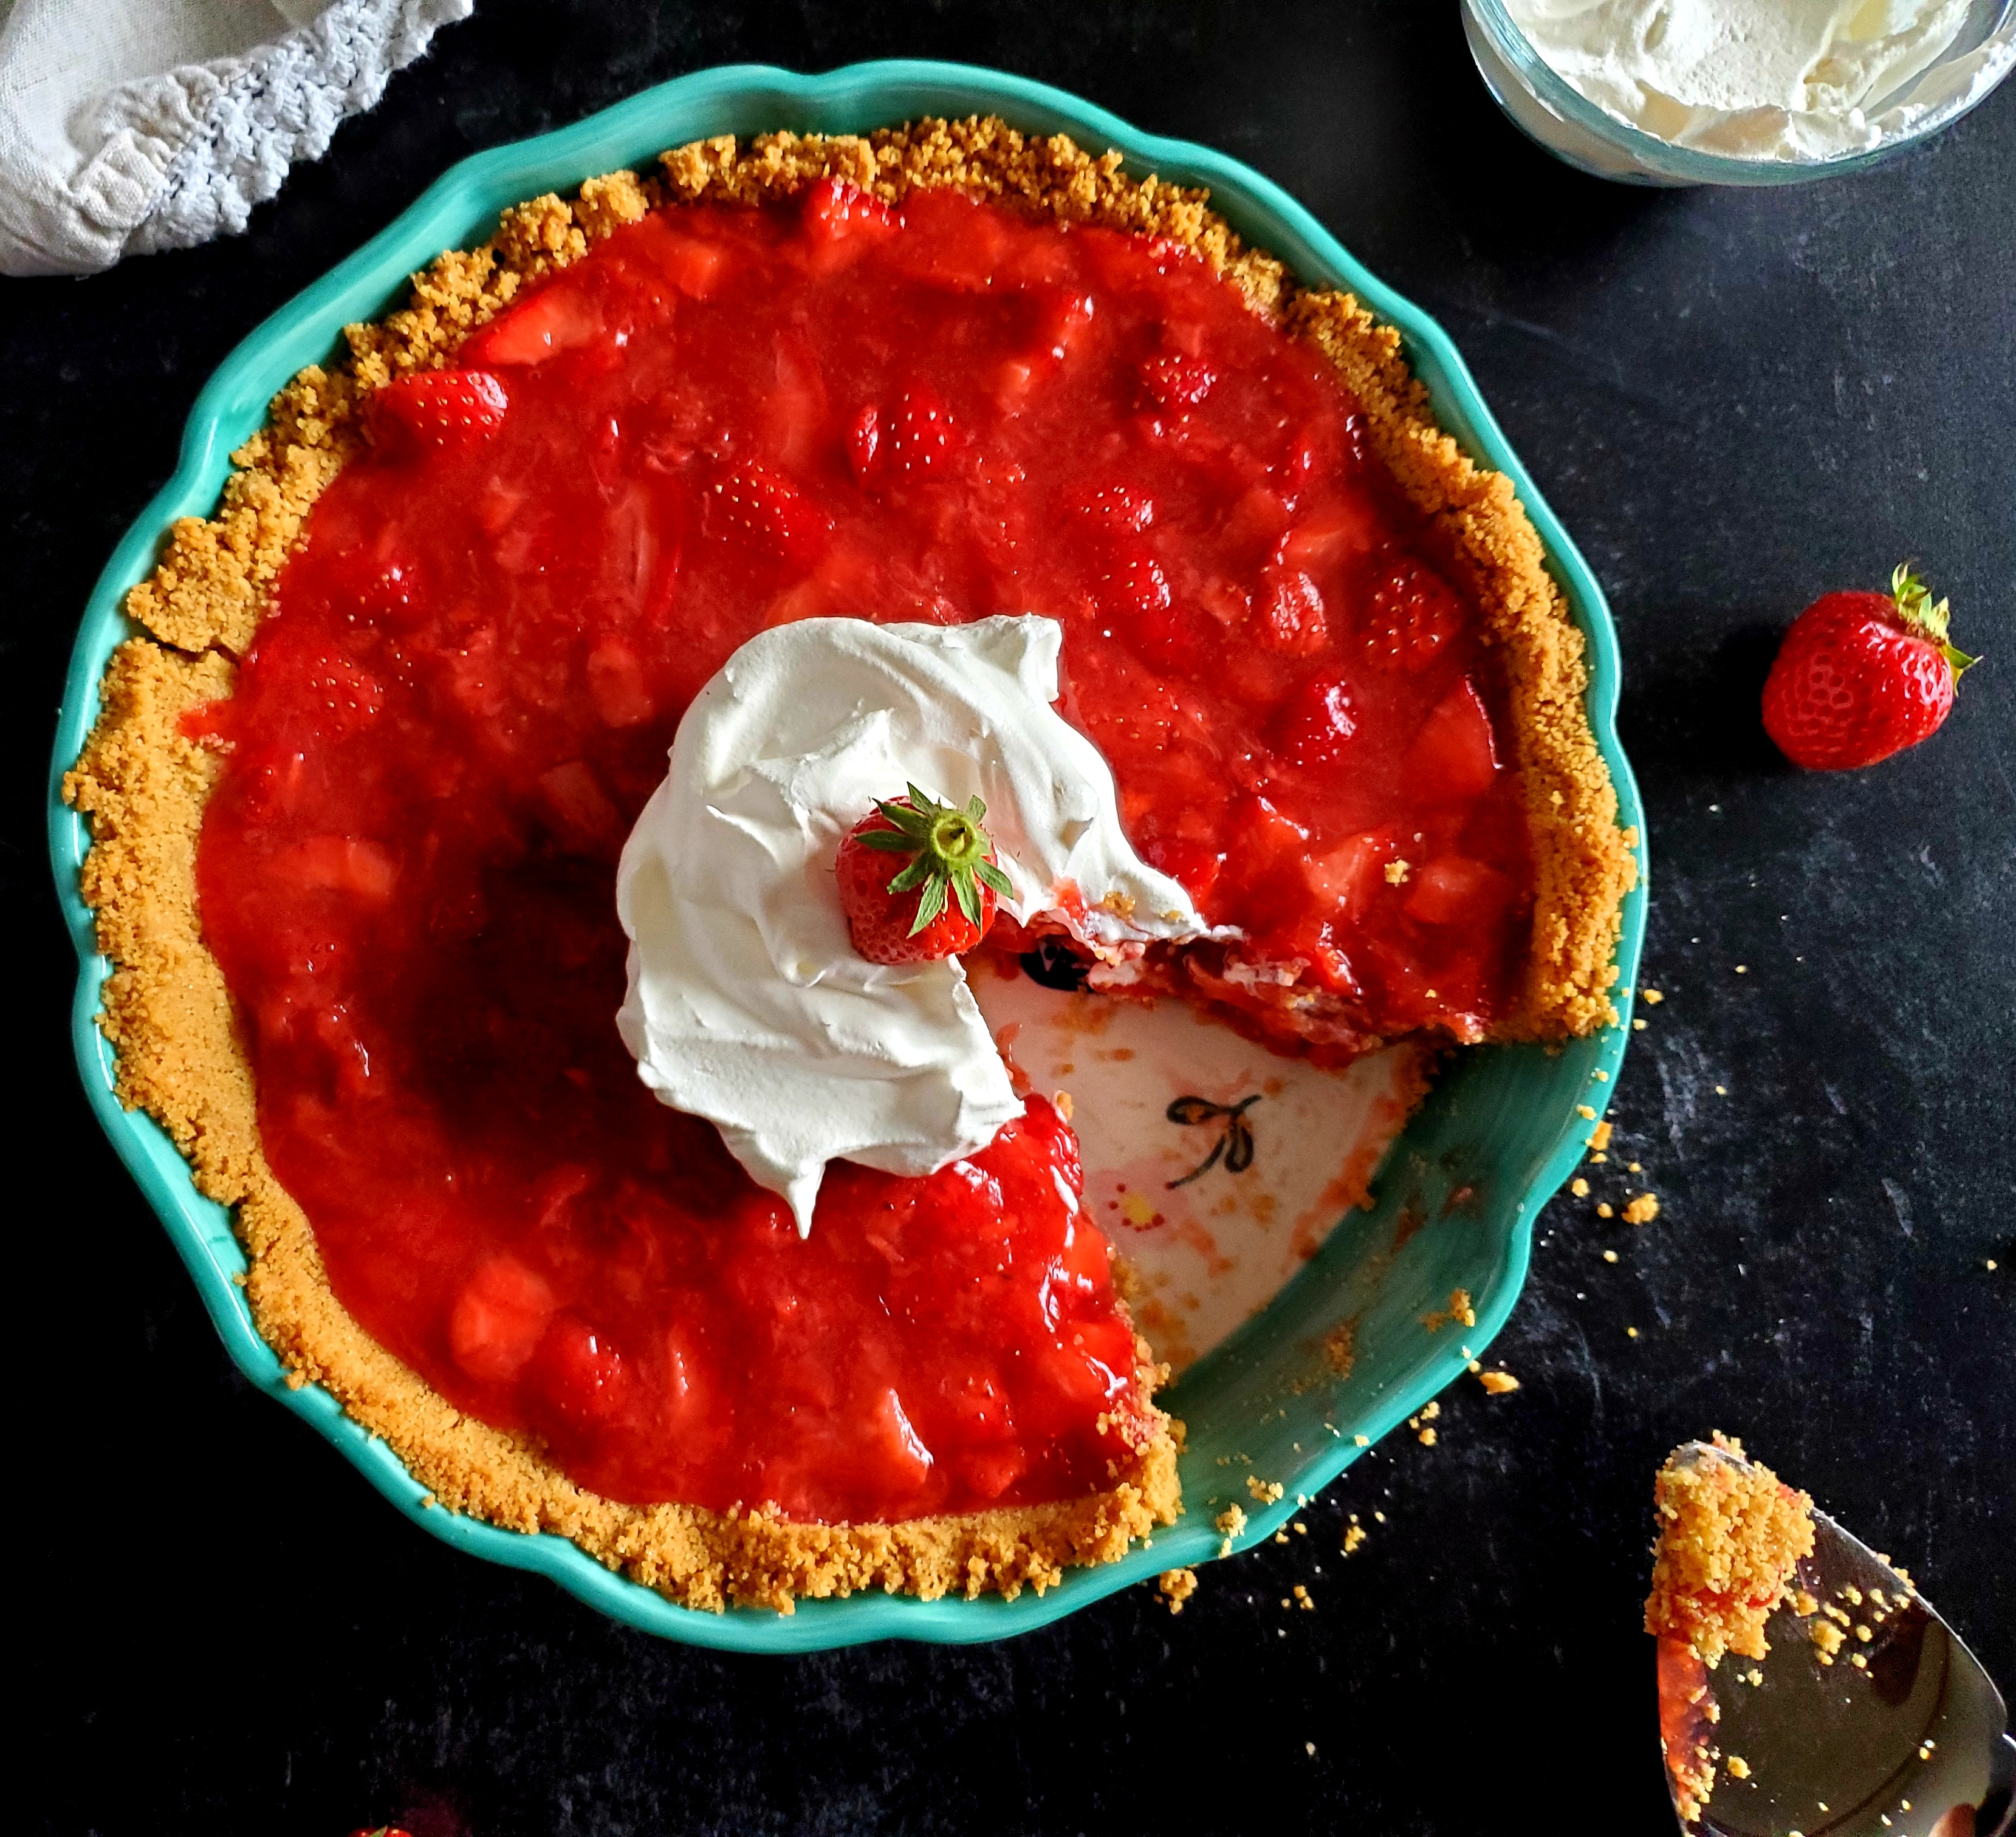 Strawberry Pie (Recipe Inspired by THE COOKBOOK CLUB)